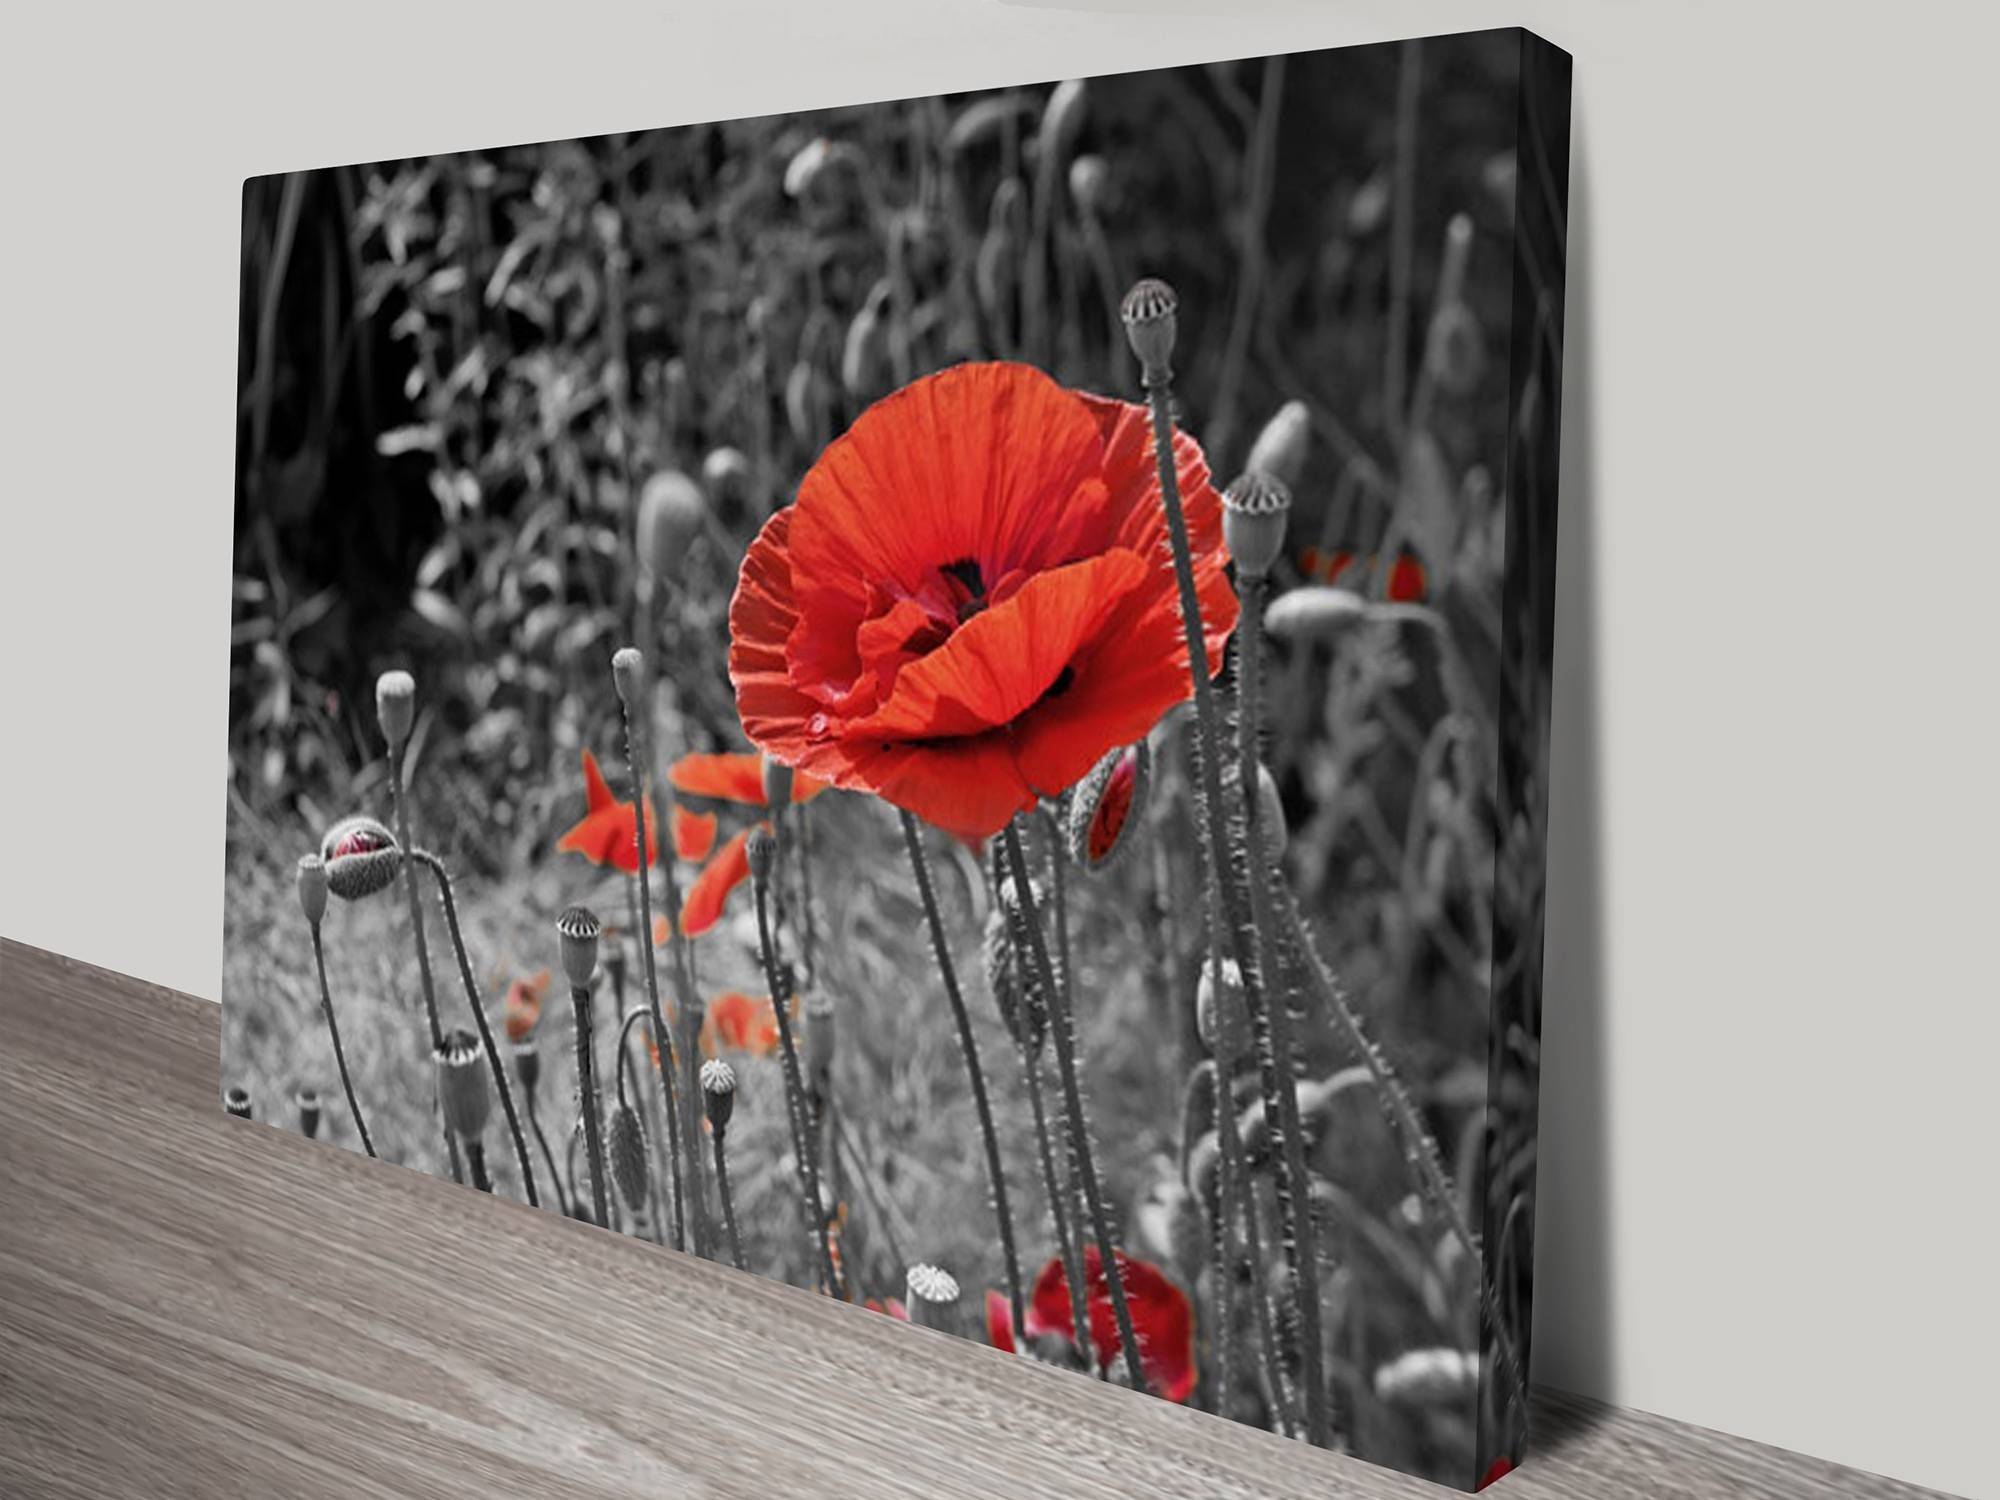 Colour Splash Canvas Prints Australia Within Most Recent Red Poppy Canvas Wall Art (View 1 of 20)